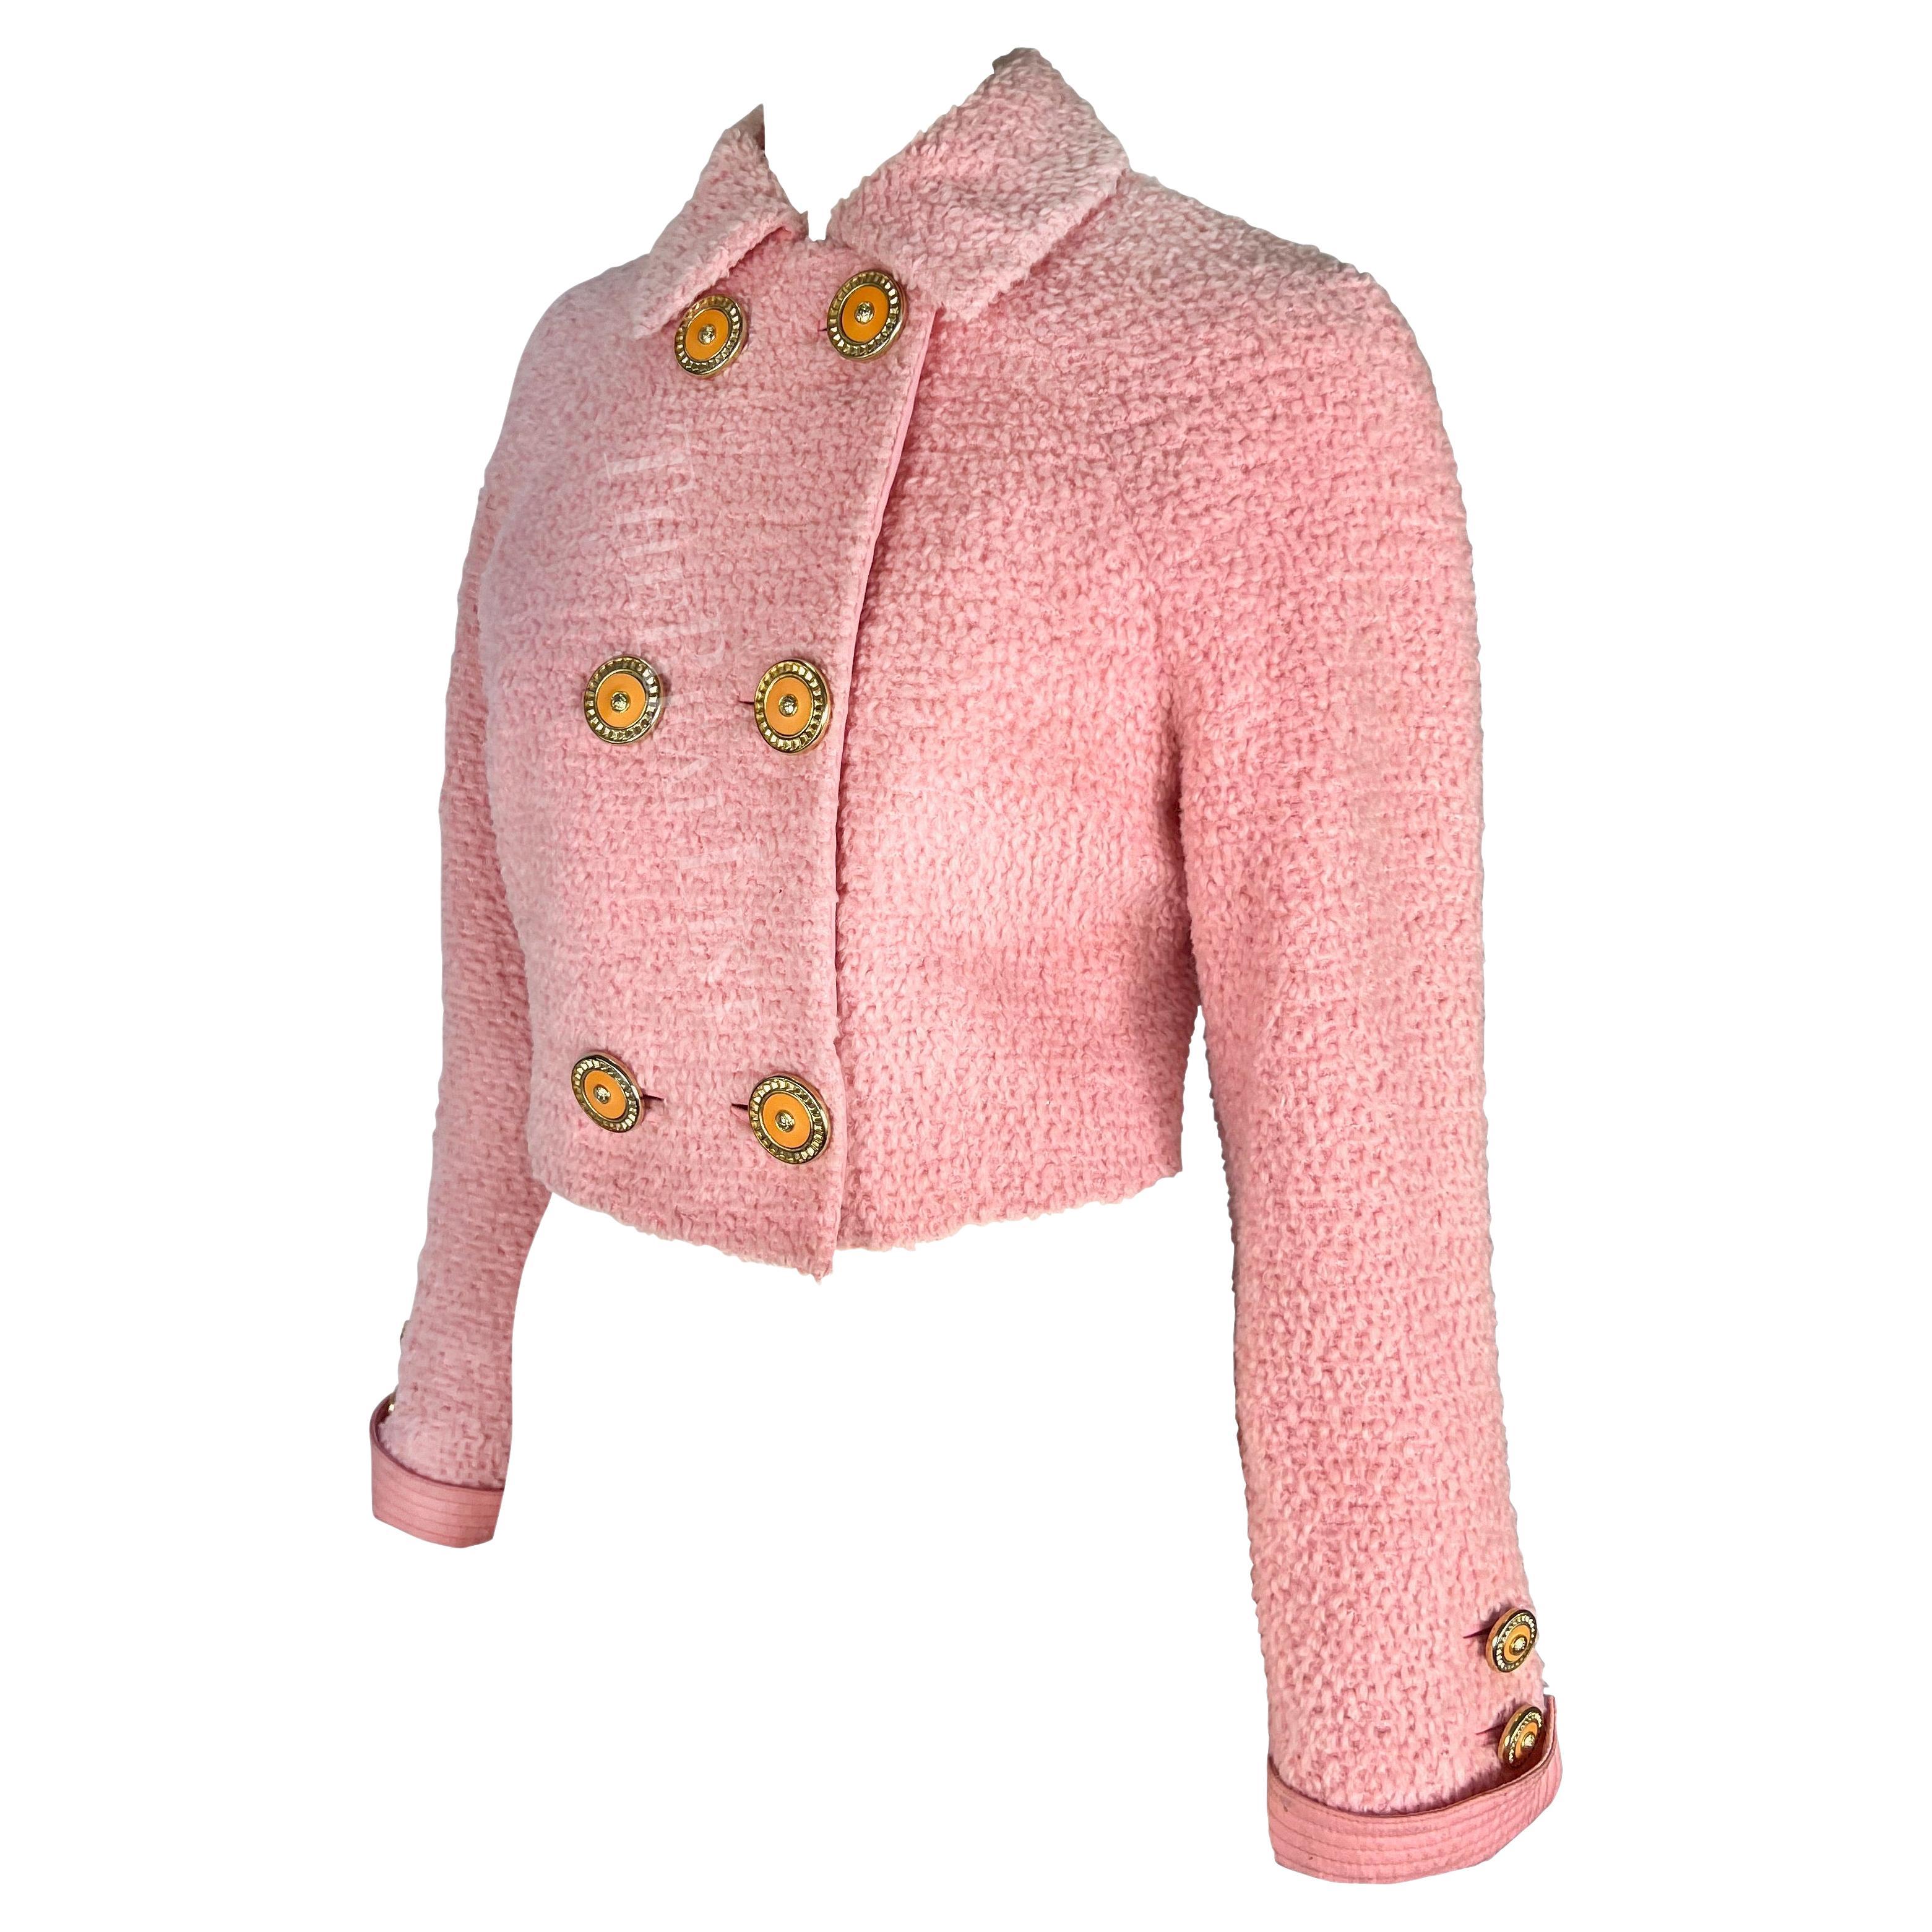 F/W 1994 Gianni Versace Light Pink Tweed Cropped Double Breasted Runway Jacket In Good Condition For Sale In West Hollywood, CA